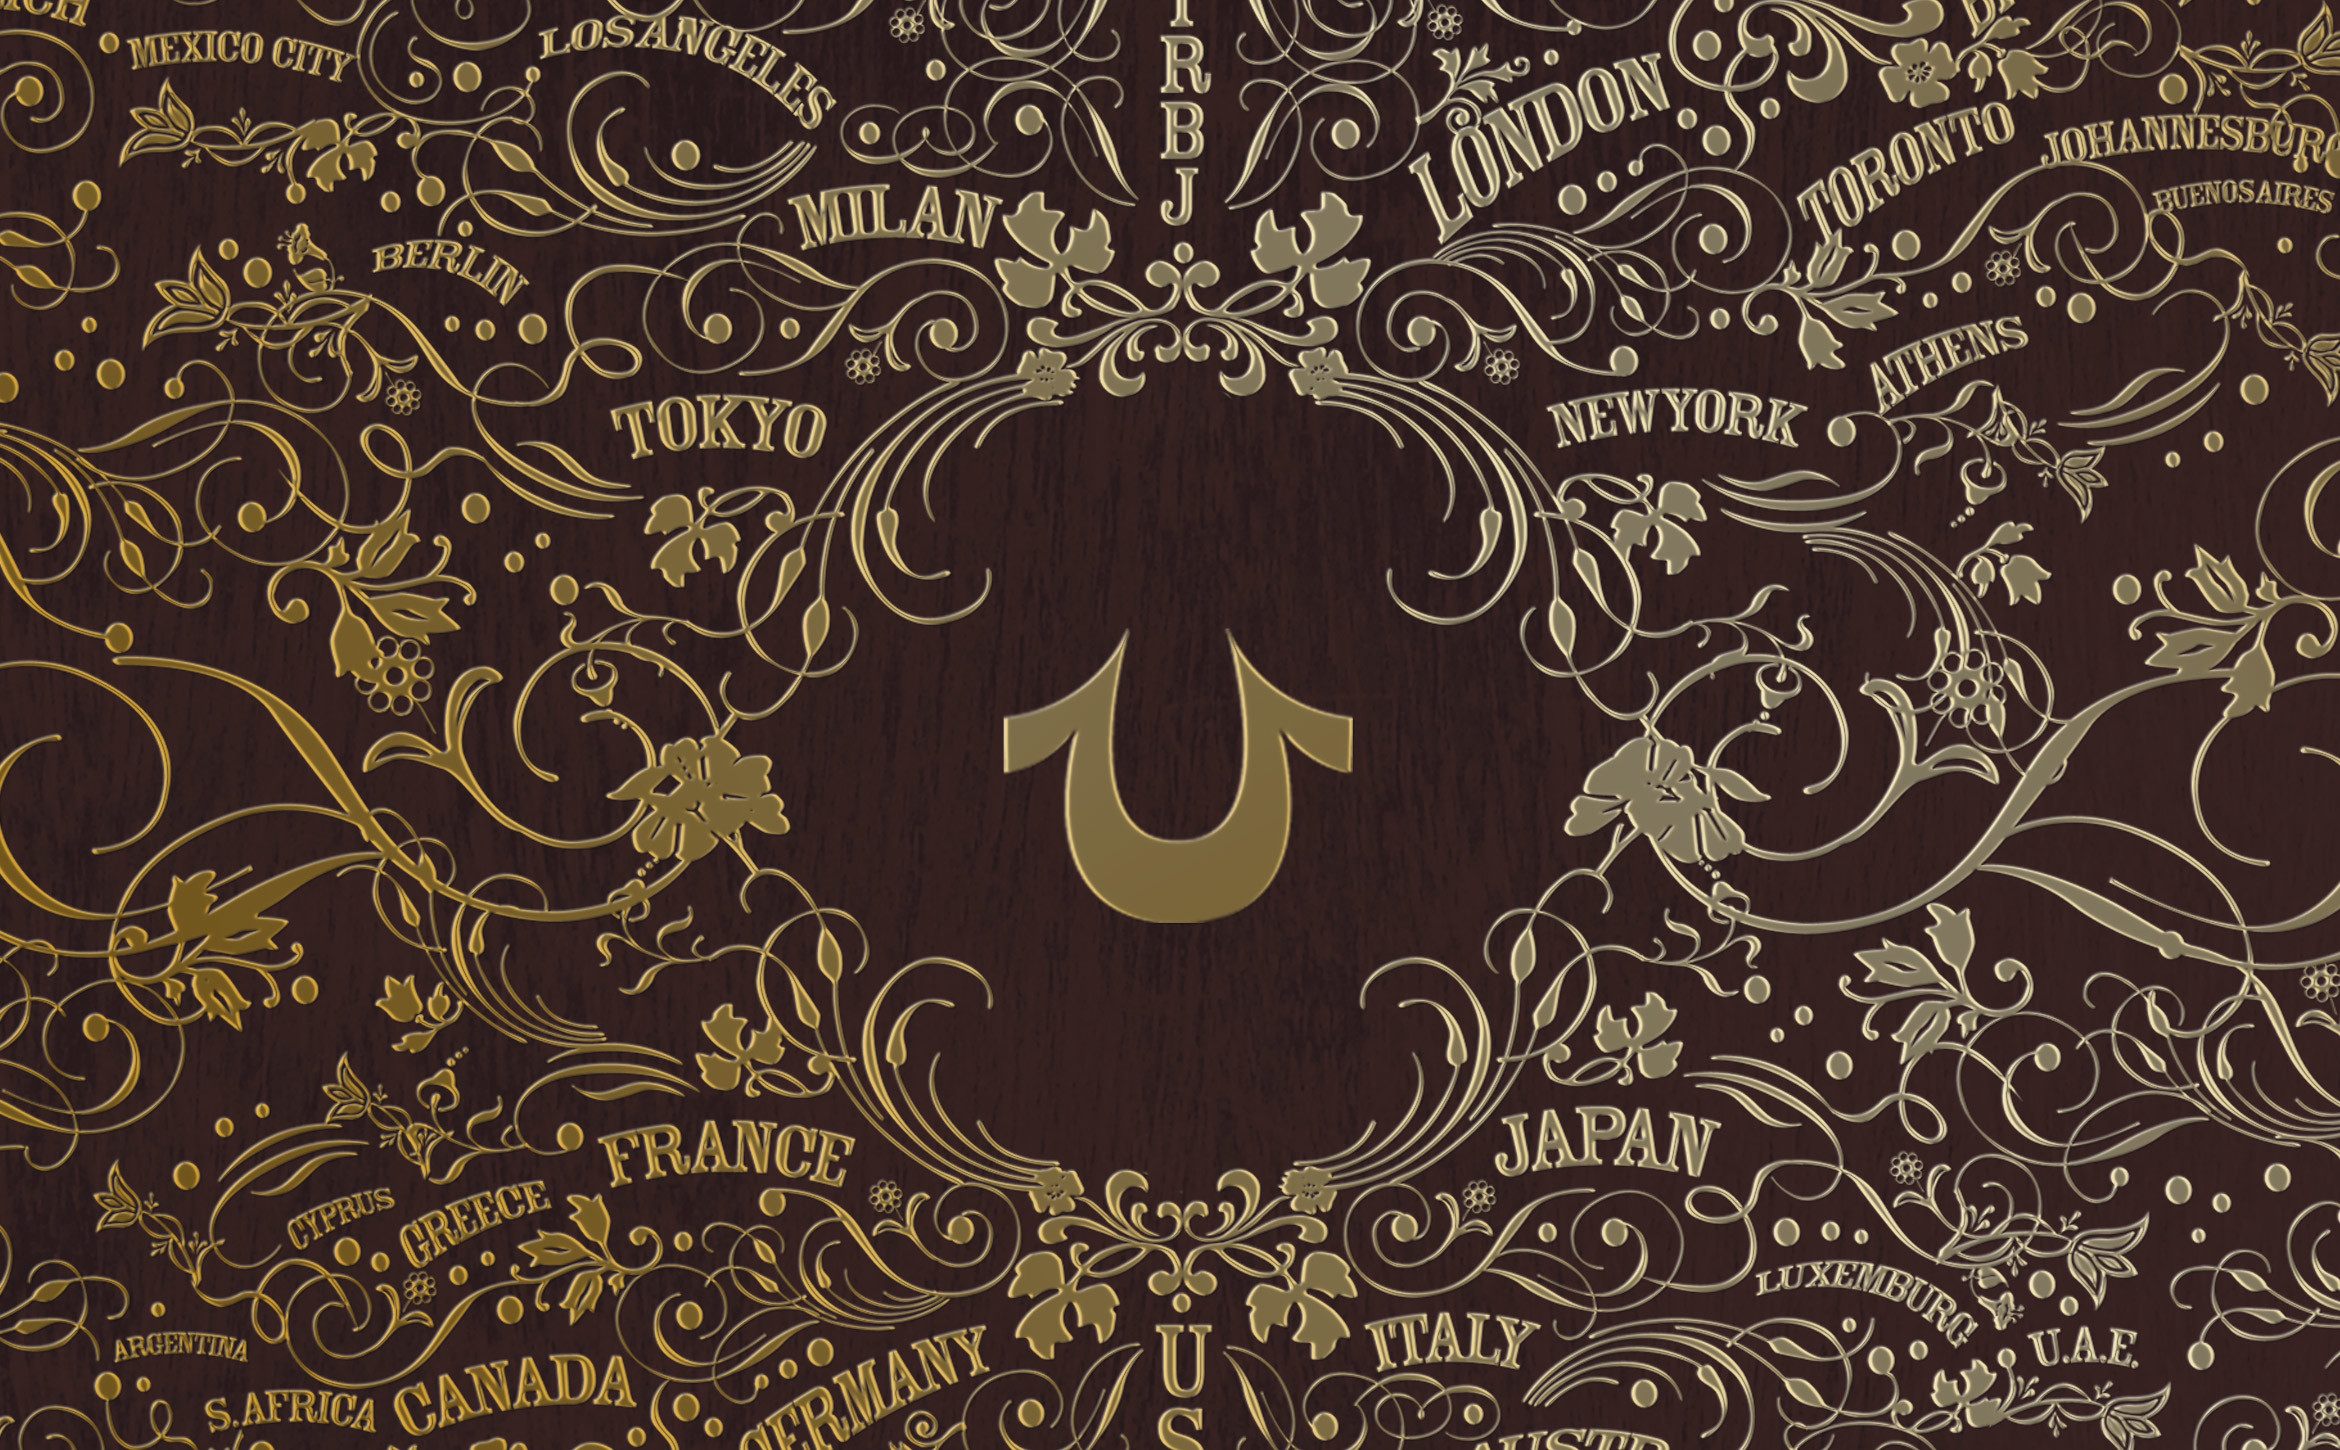 We Used Dark Wood, Psychedelic Wood Cut Fonts And A - HD Wallpaper 